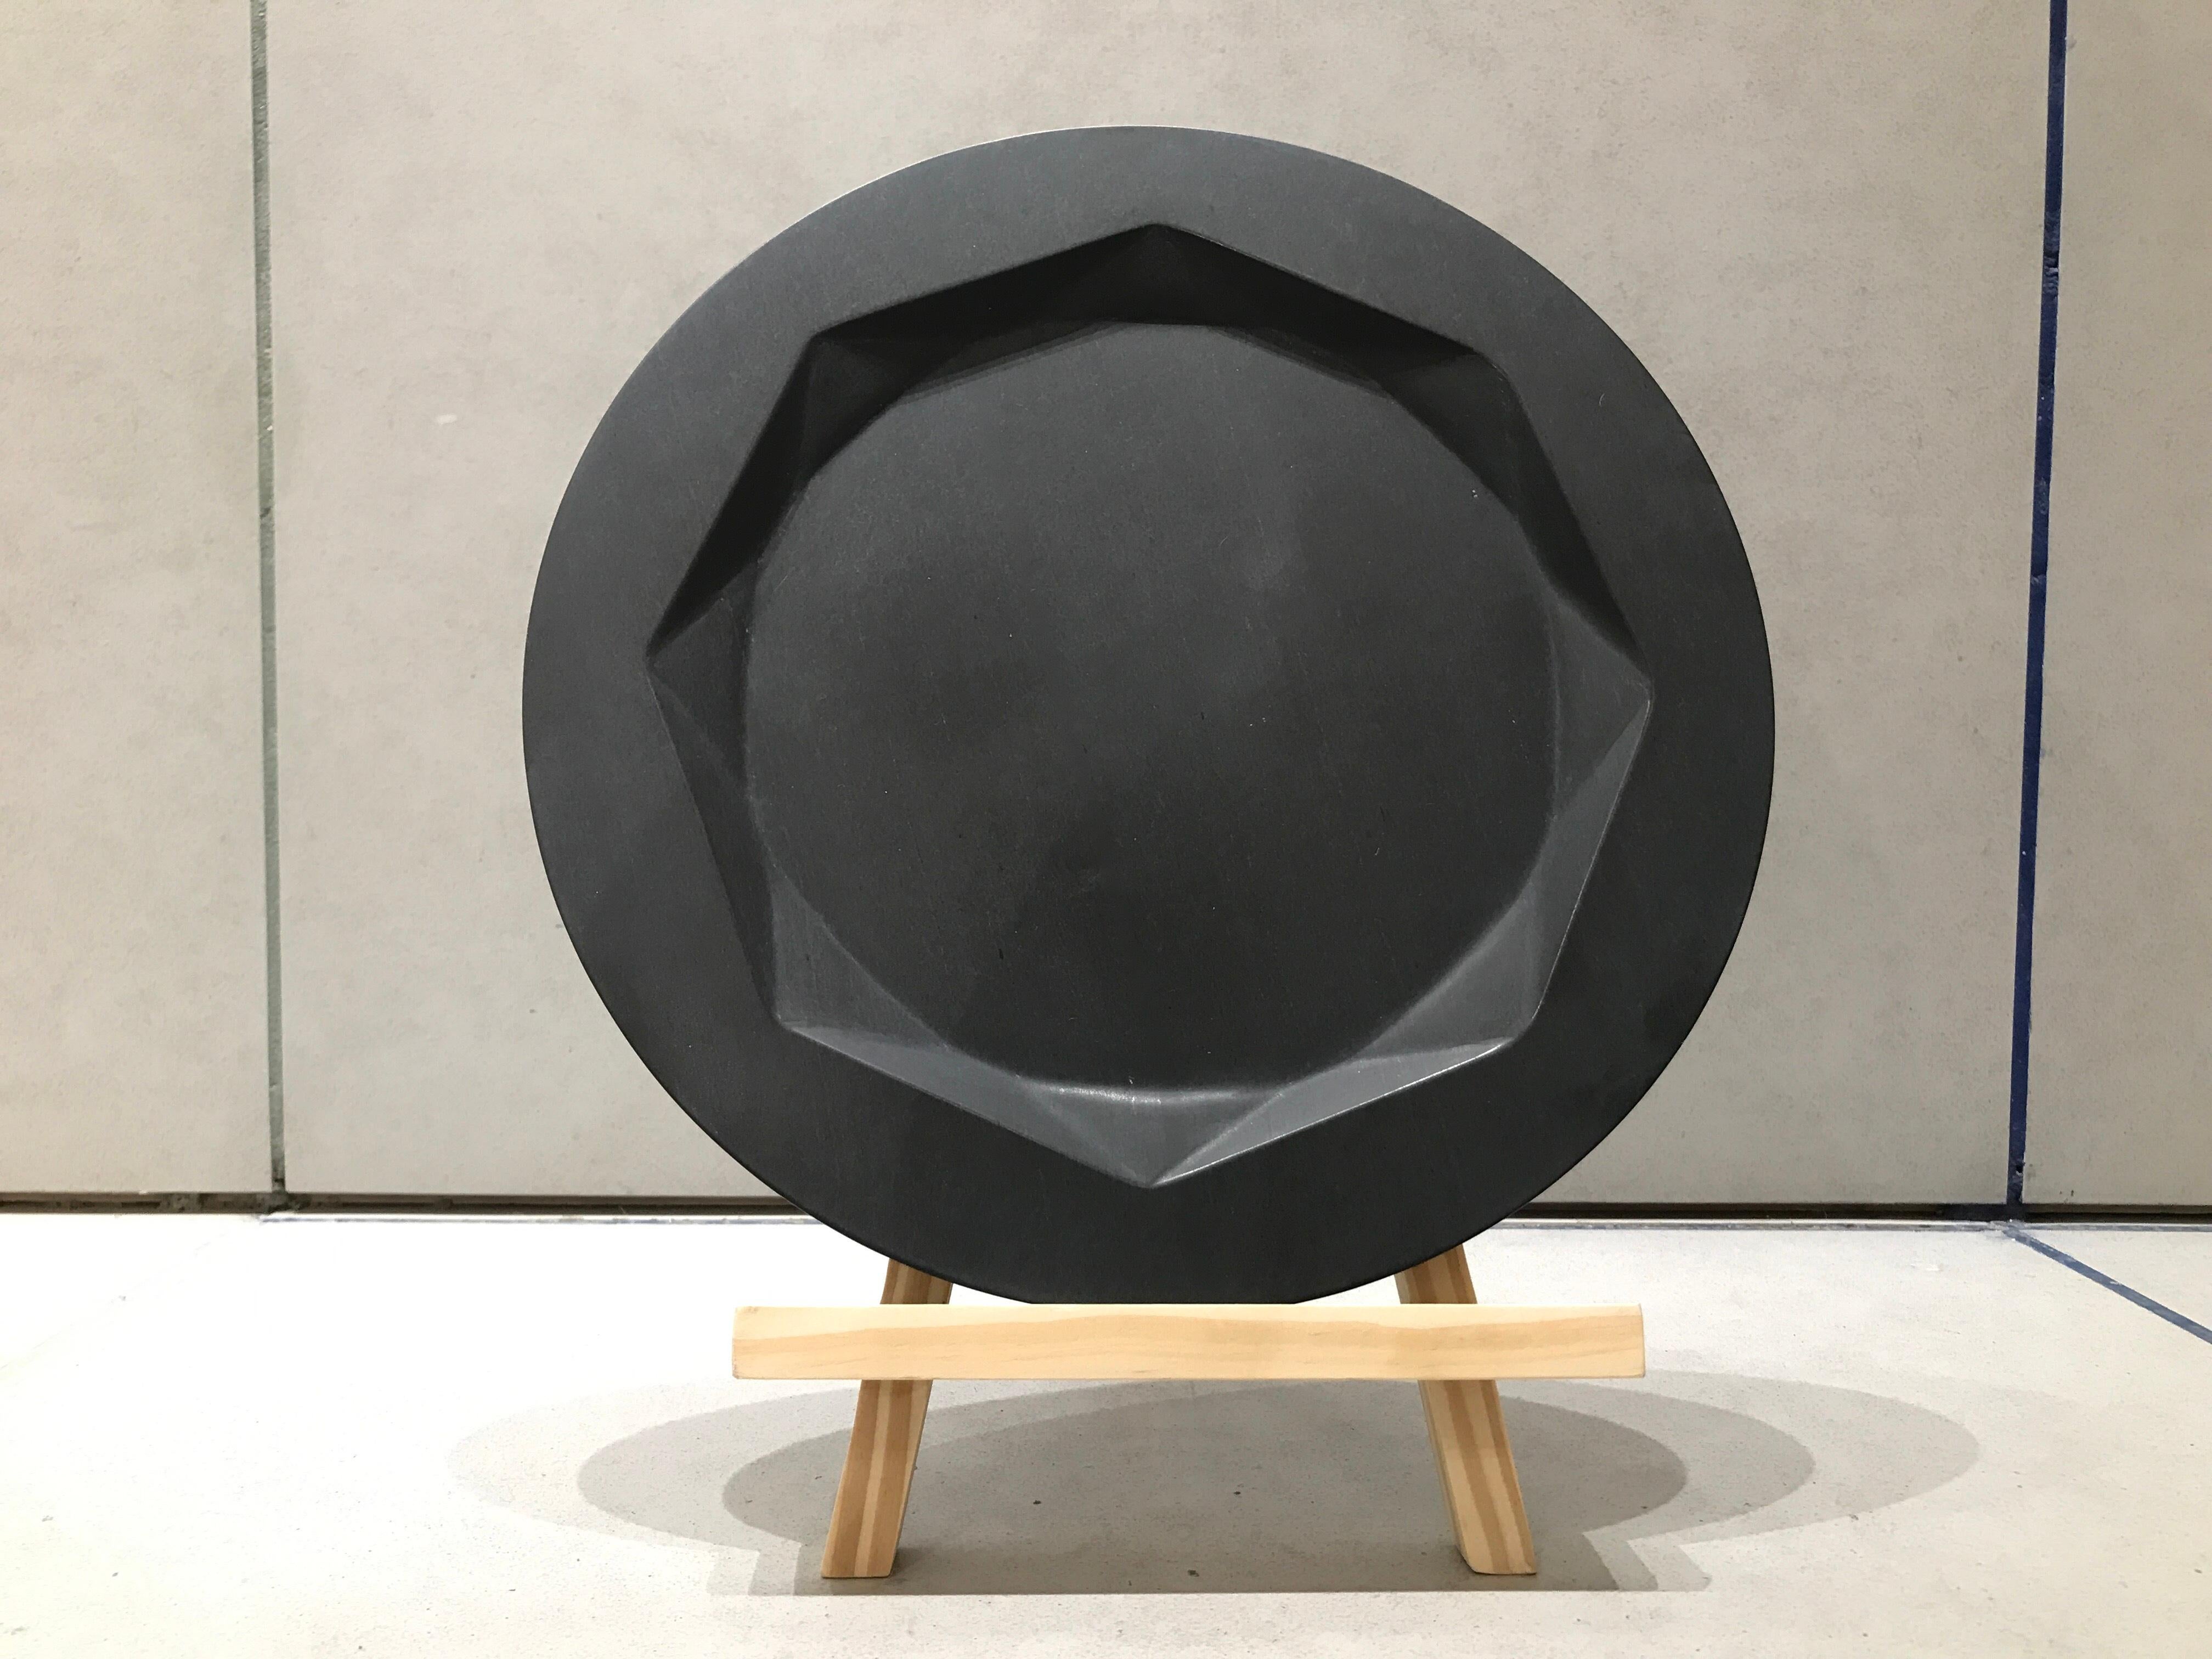 The Jewel Plates Black technical innovation allowed us to adapt sophisticated gemstone cutting techniques for marble and stone. Koy's jewel dinner set includes dinner and dessert plates; an innovation of the empress cut, traditionally used for